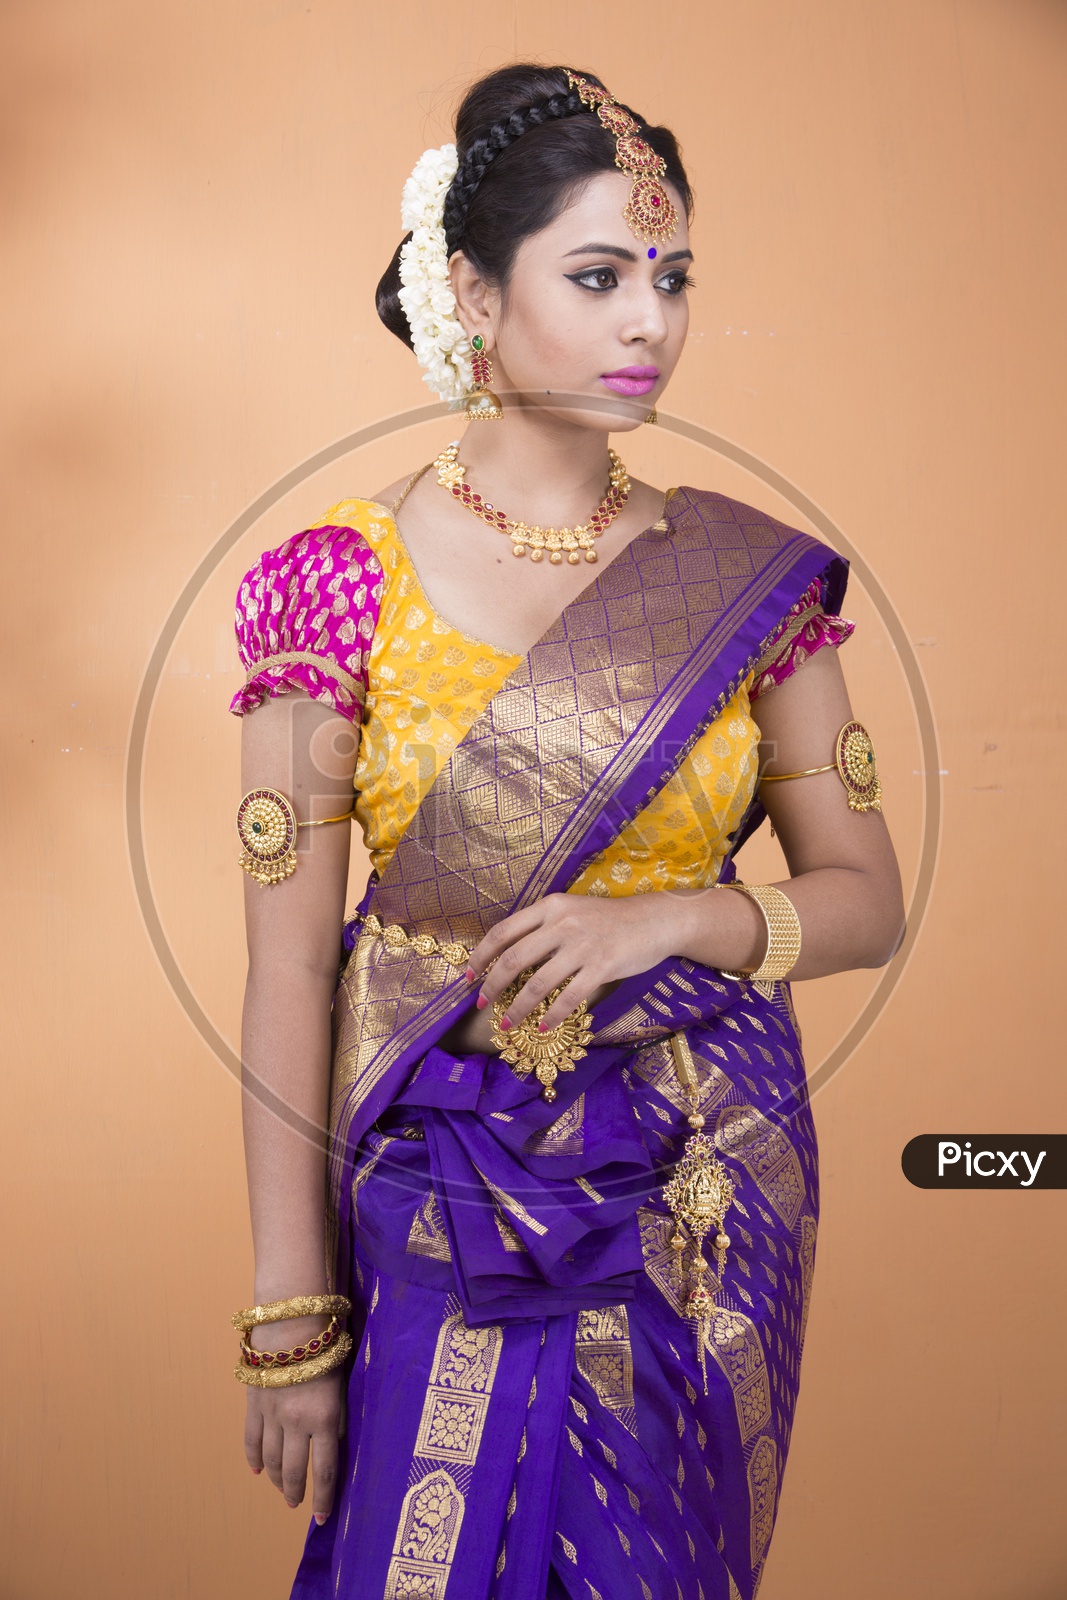 Indian Bride dressed up in purple saree portrait in Studio Lighting / Traditionally dressed up girl